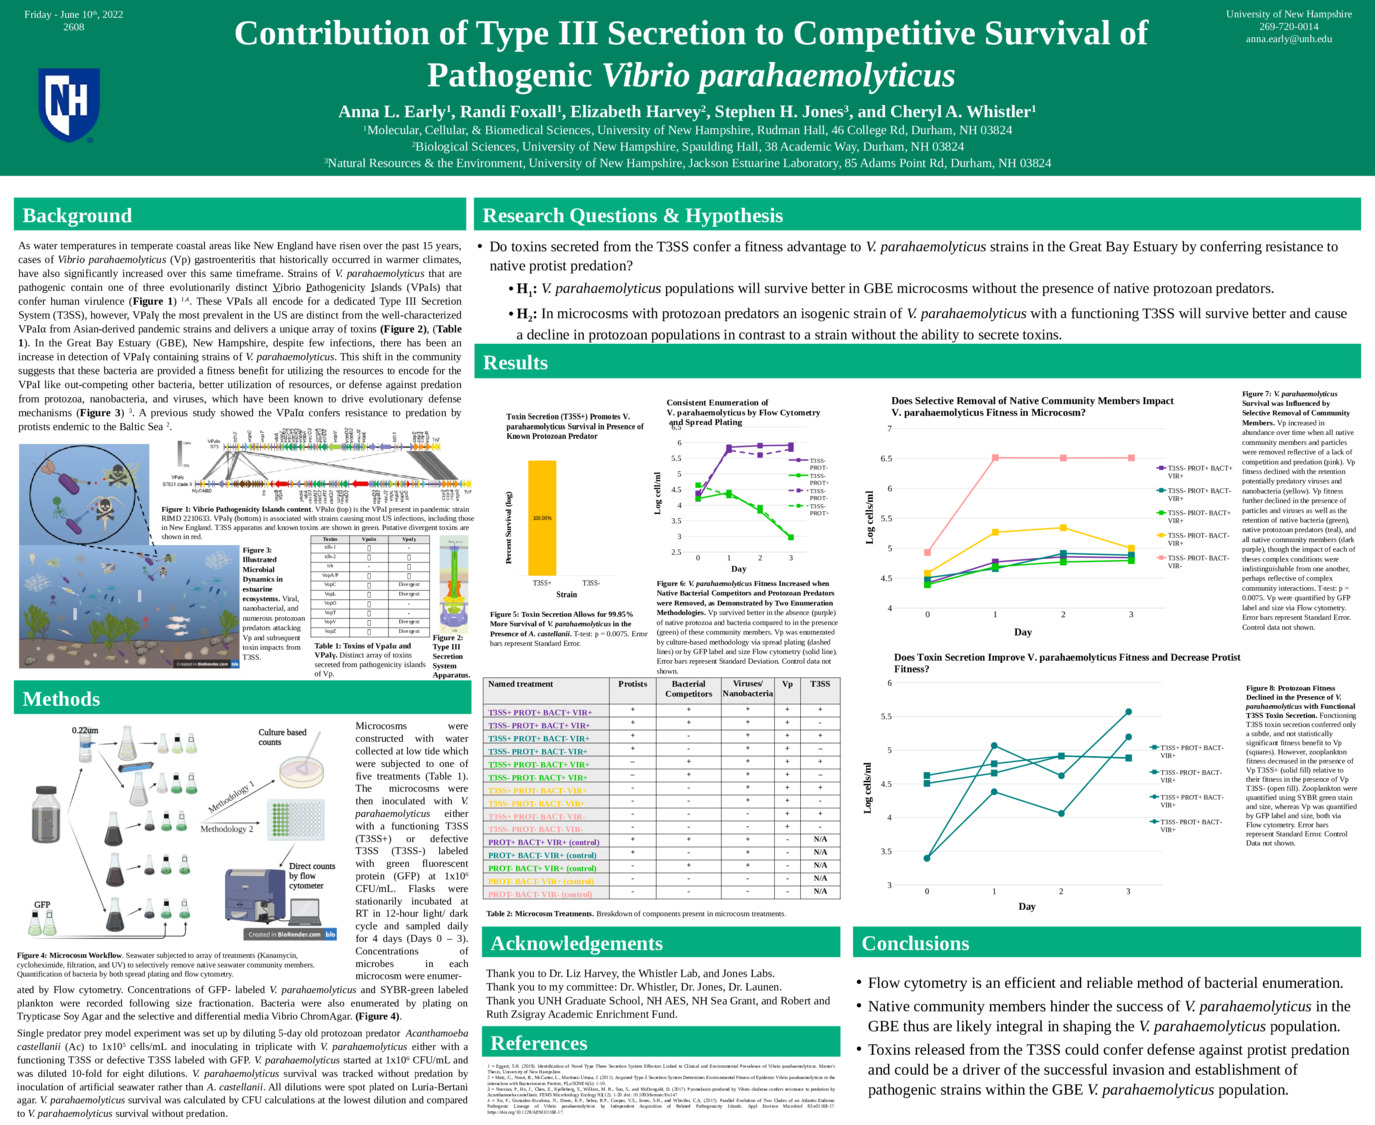 Contribution Of Type Iii Secretion To Competitive Survival Of Pathogenic Vibrio Parahaemolyticus by ae1092